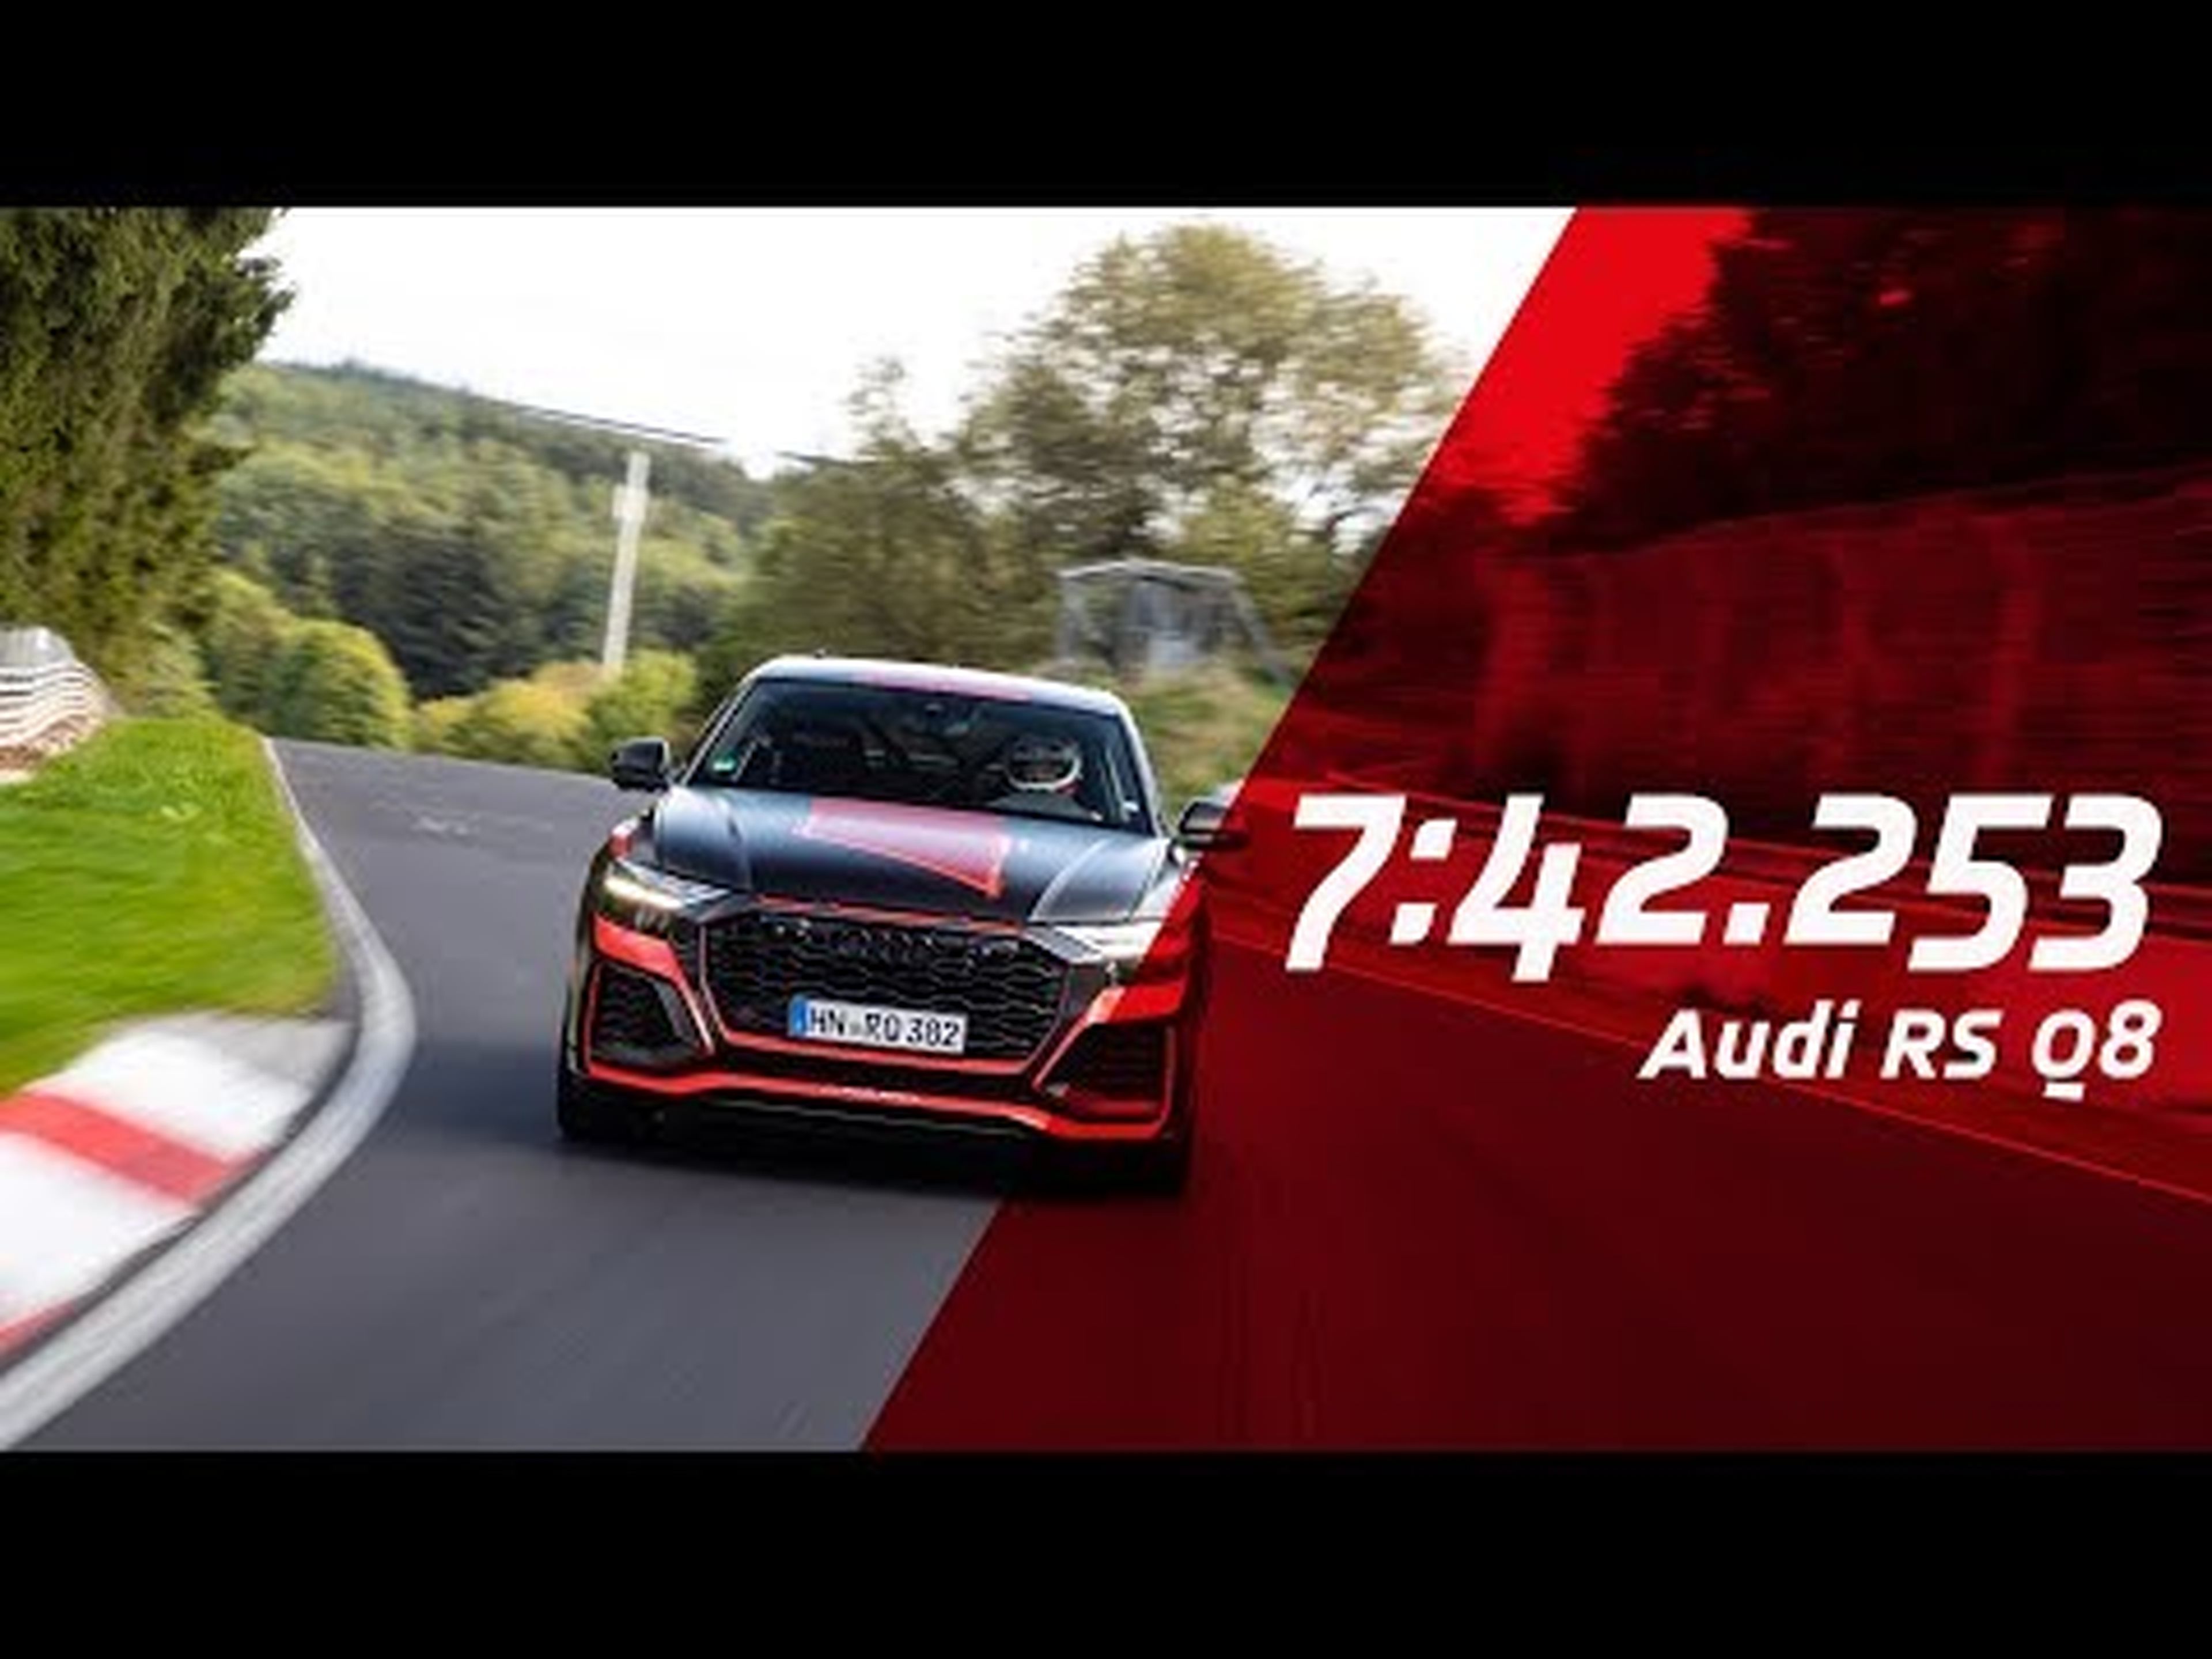 New SUV Record Nordschleife | Audi RS Q8